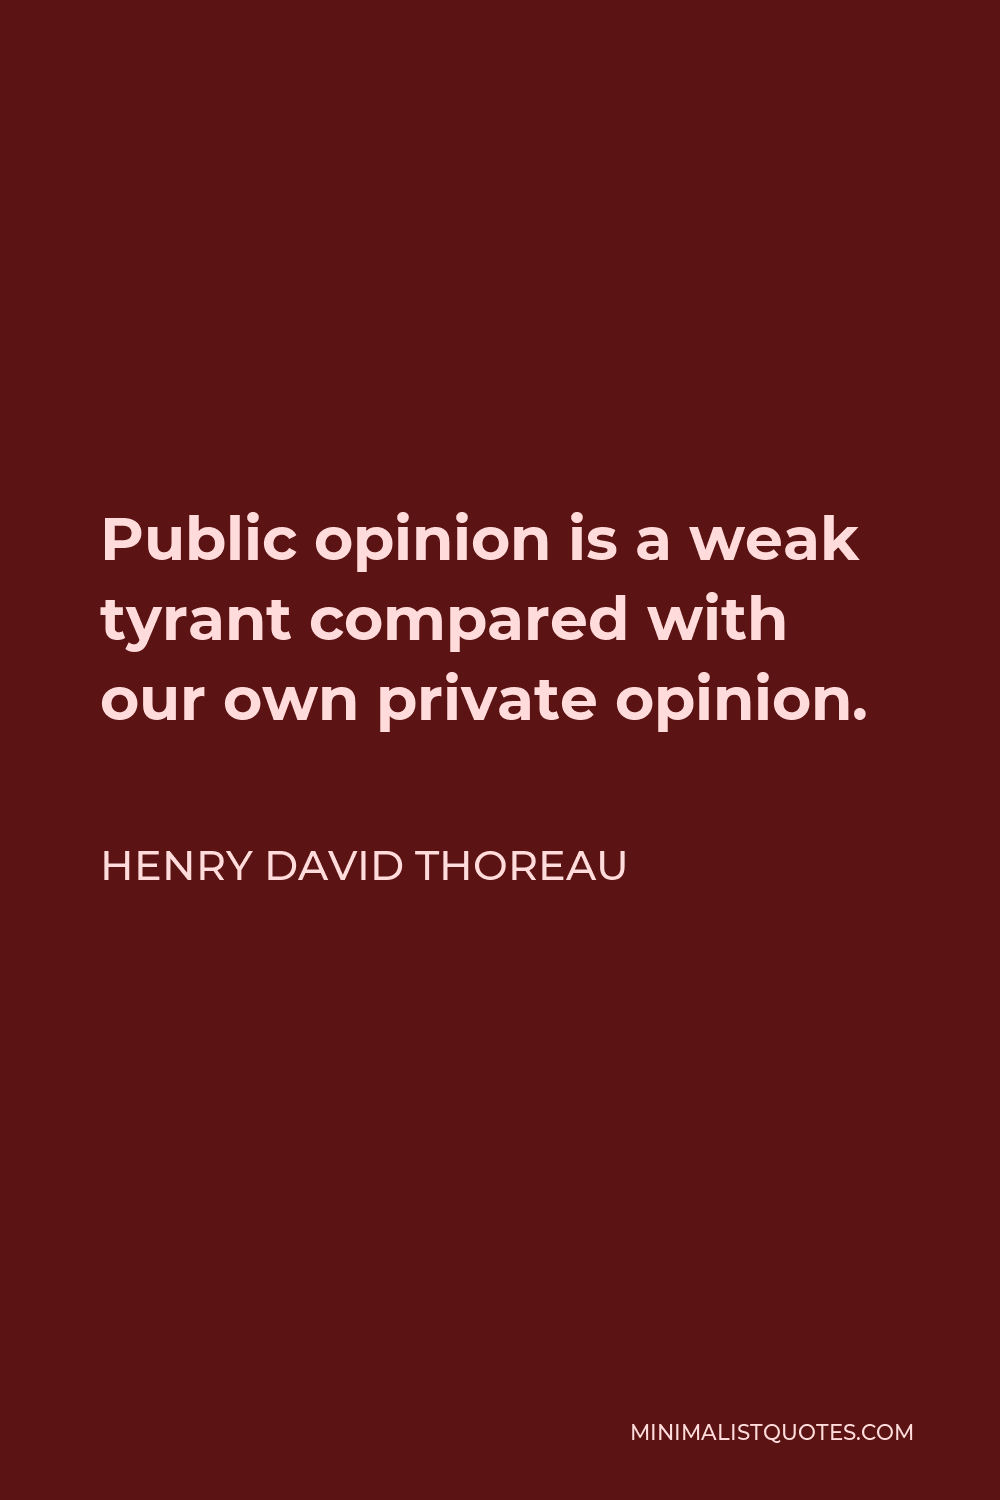 Henry David Thoreau Quote - Public opinion is a weak tyrant compared with our own private opinion.